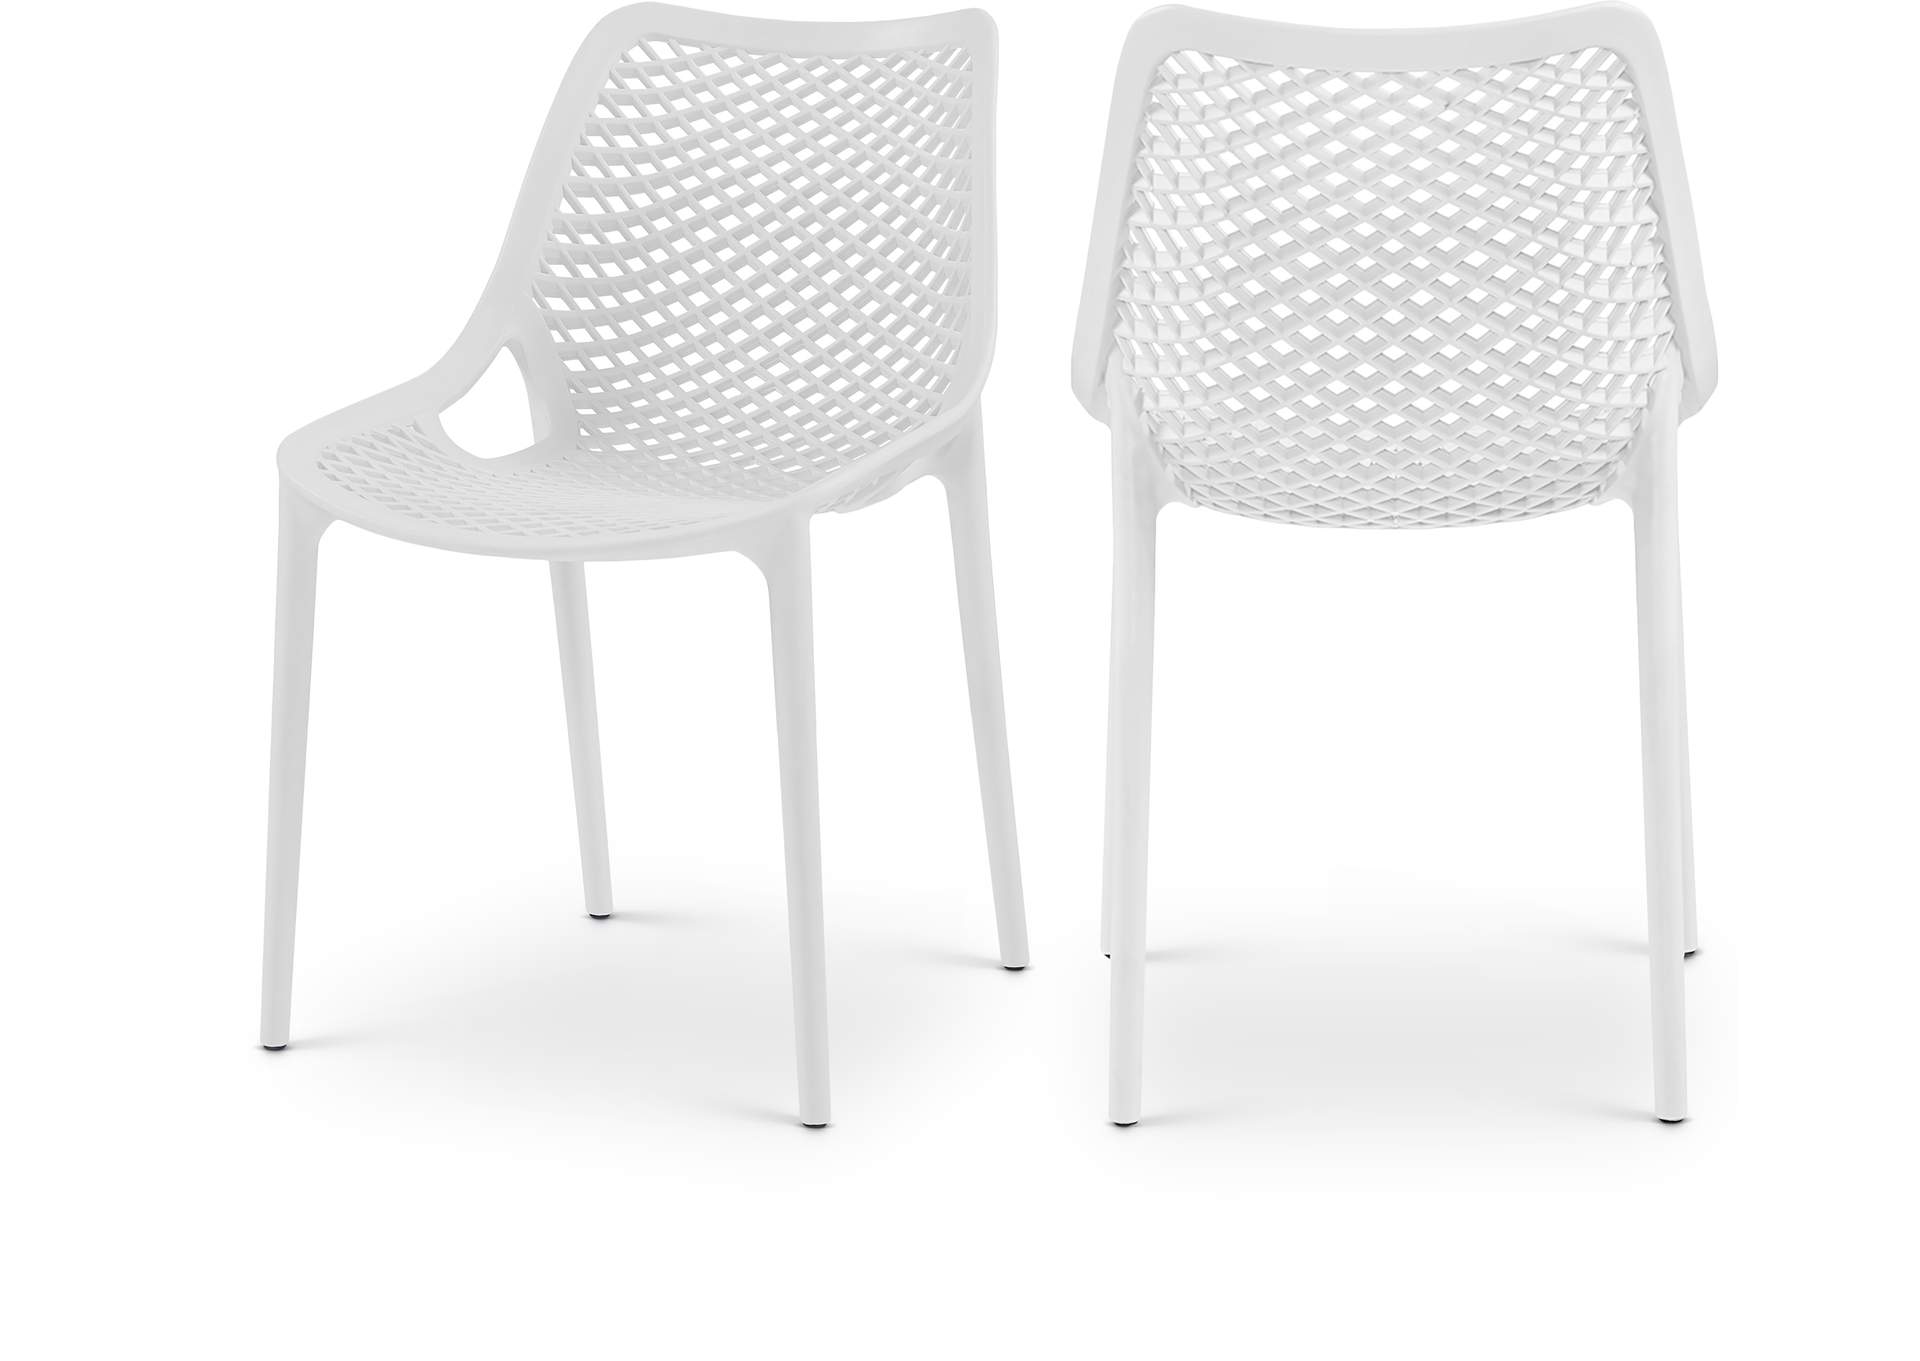 Mykonos White Outdoor Patio Dining Chair Set of 4